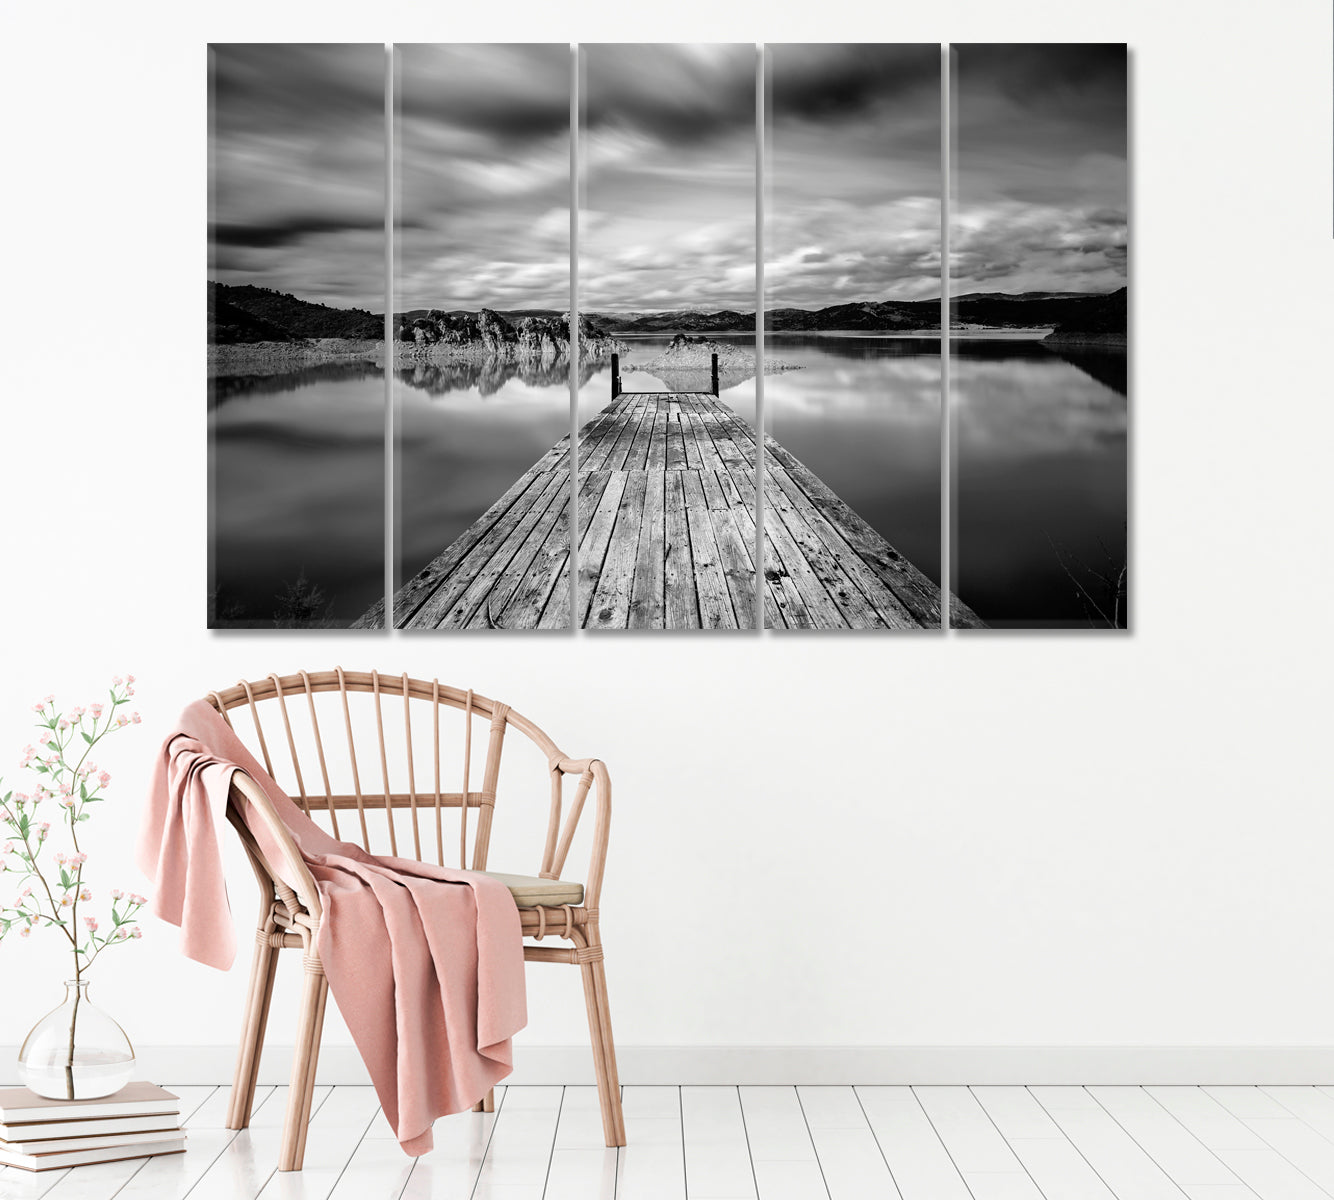 Wooden Pier in Black and White Canvas Print ArtLexy 5 Panels 36"x24" inches 